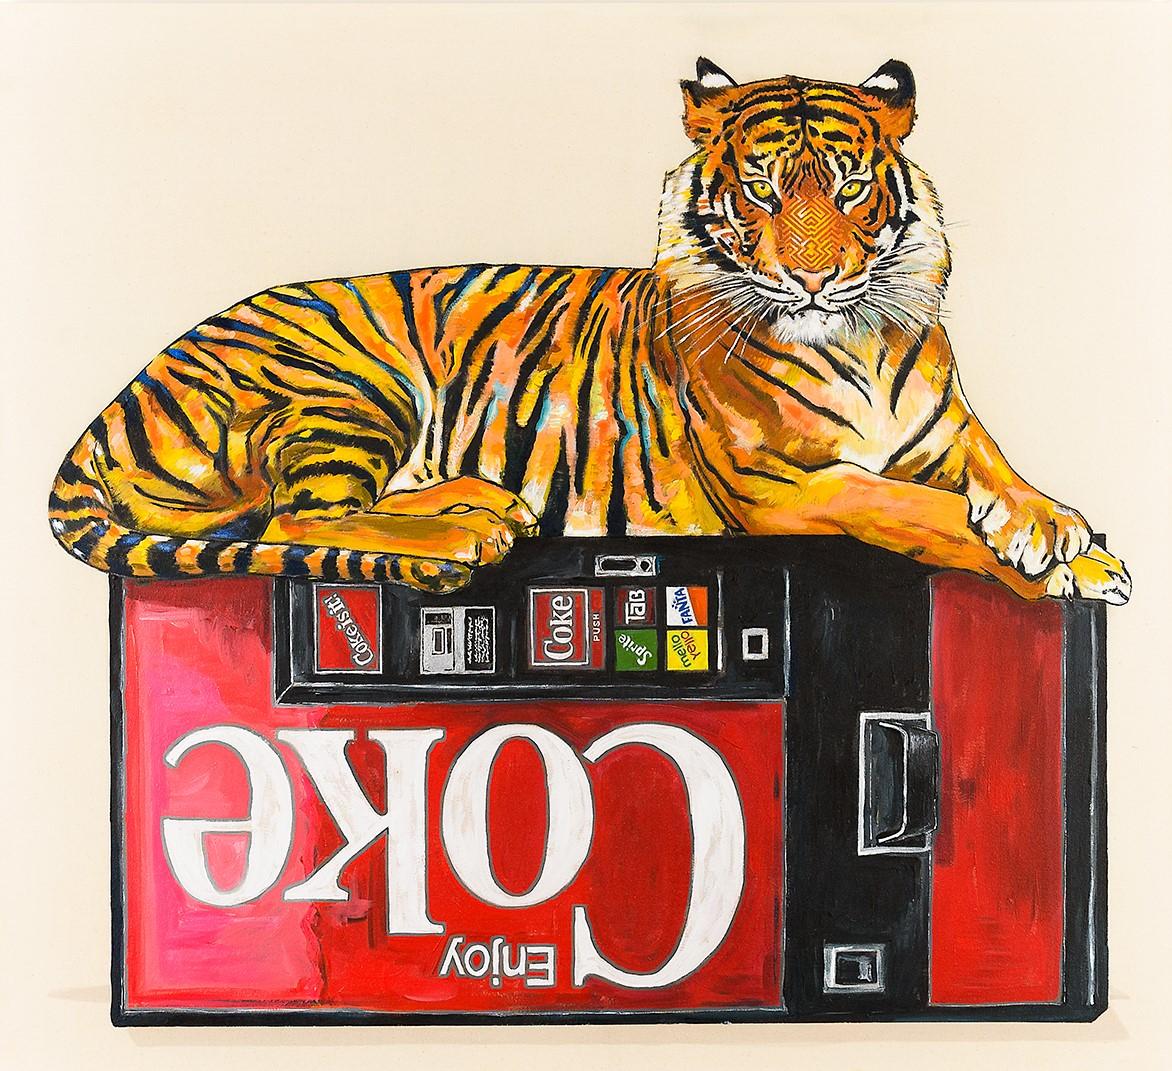 Electric Coffin Animal Painting - Tiger King